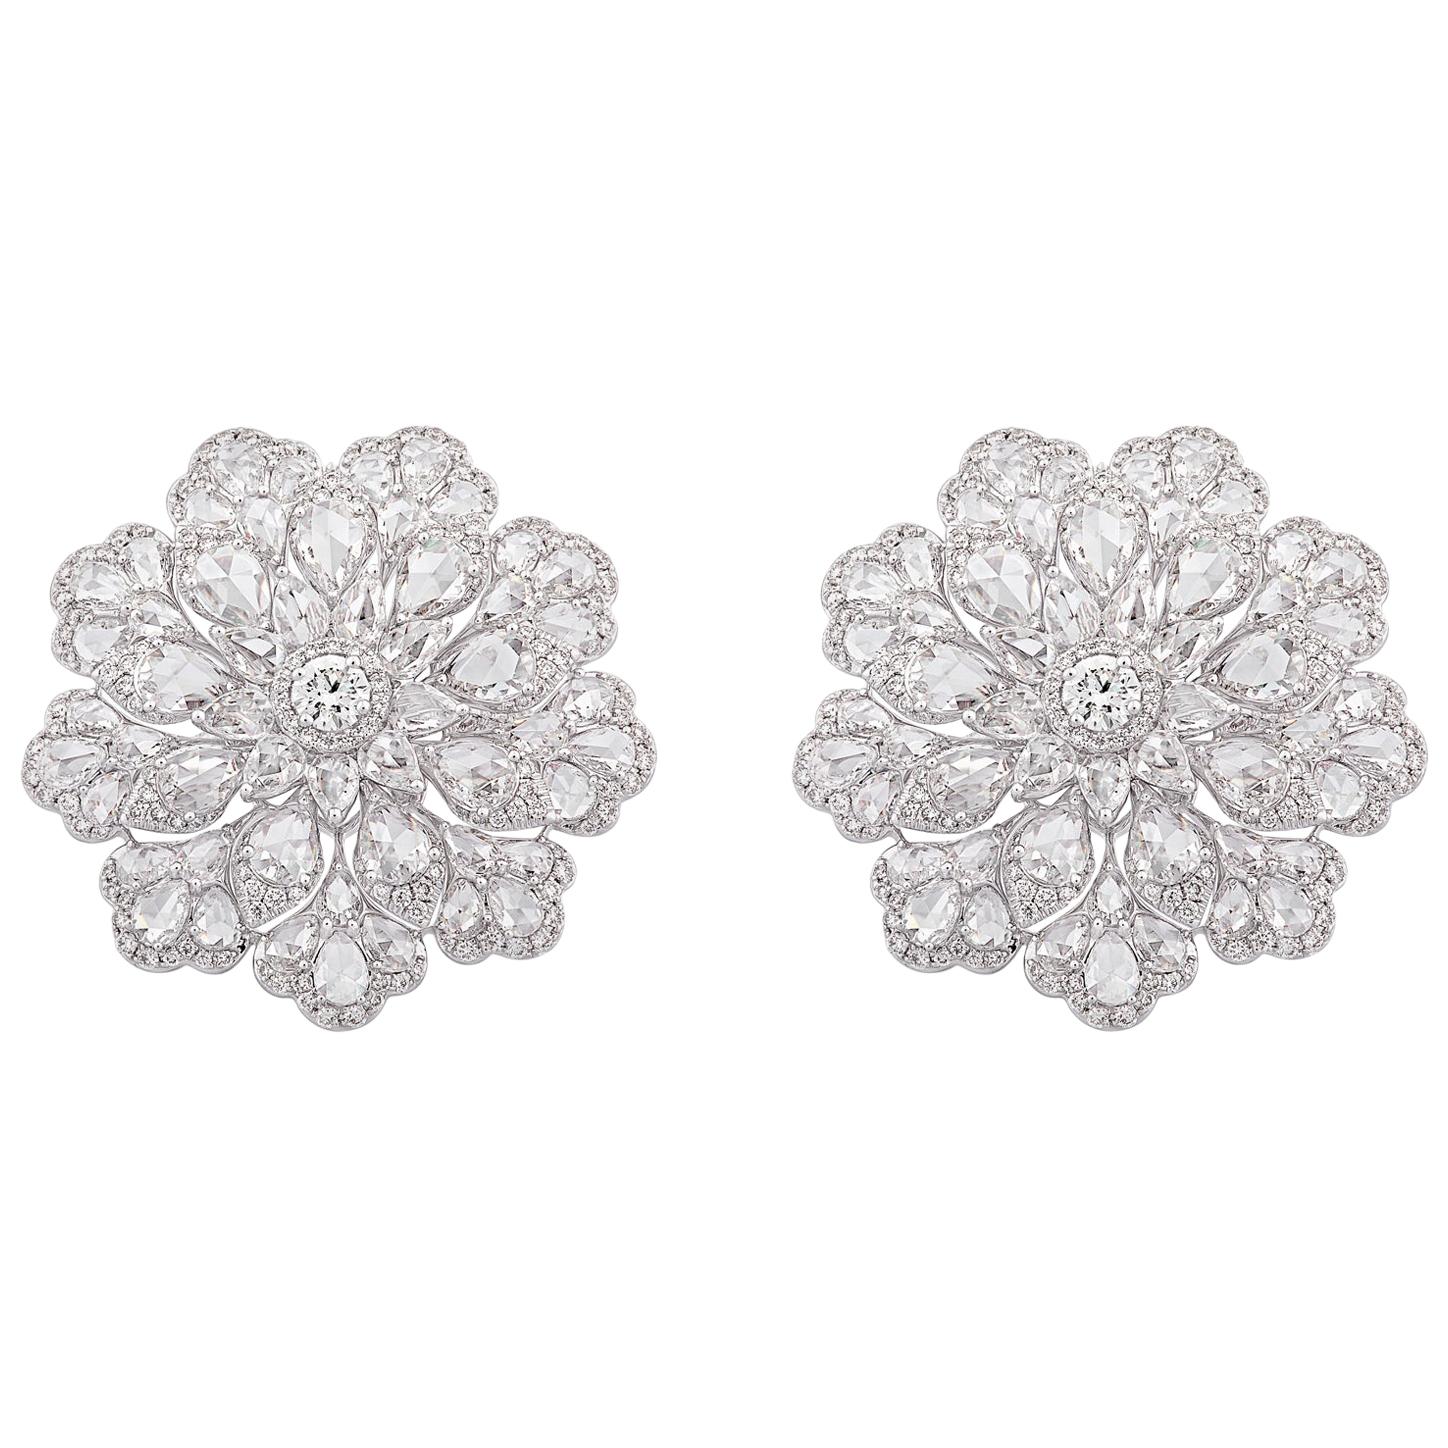 18 Karat White Gold Top Rose Cut Diamond Floral Inspired Earrings Studs For Sale